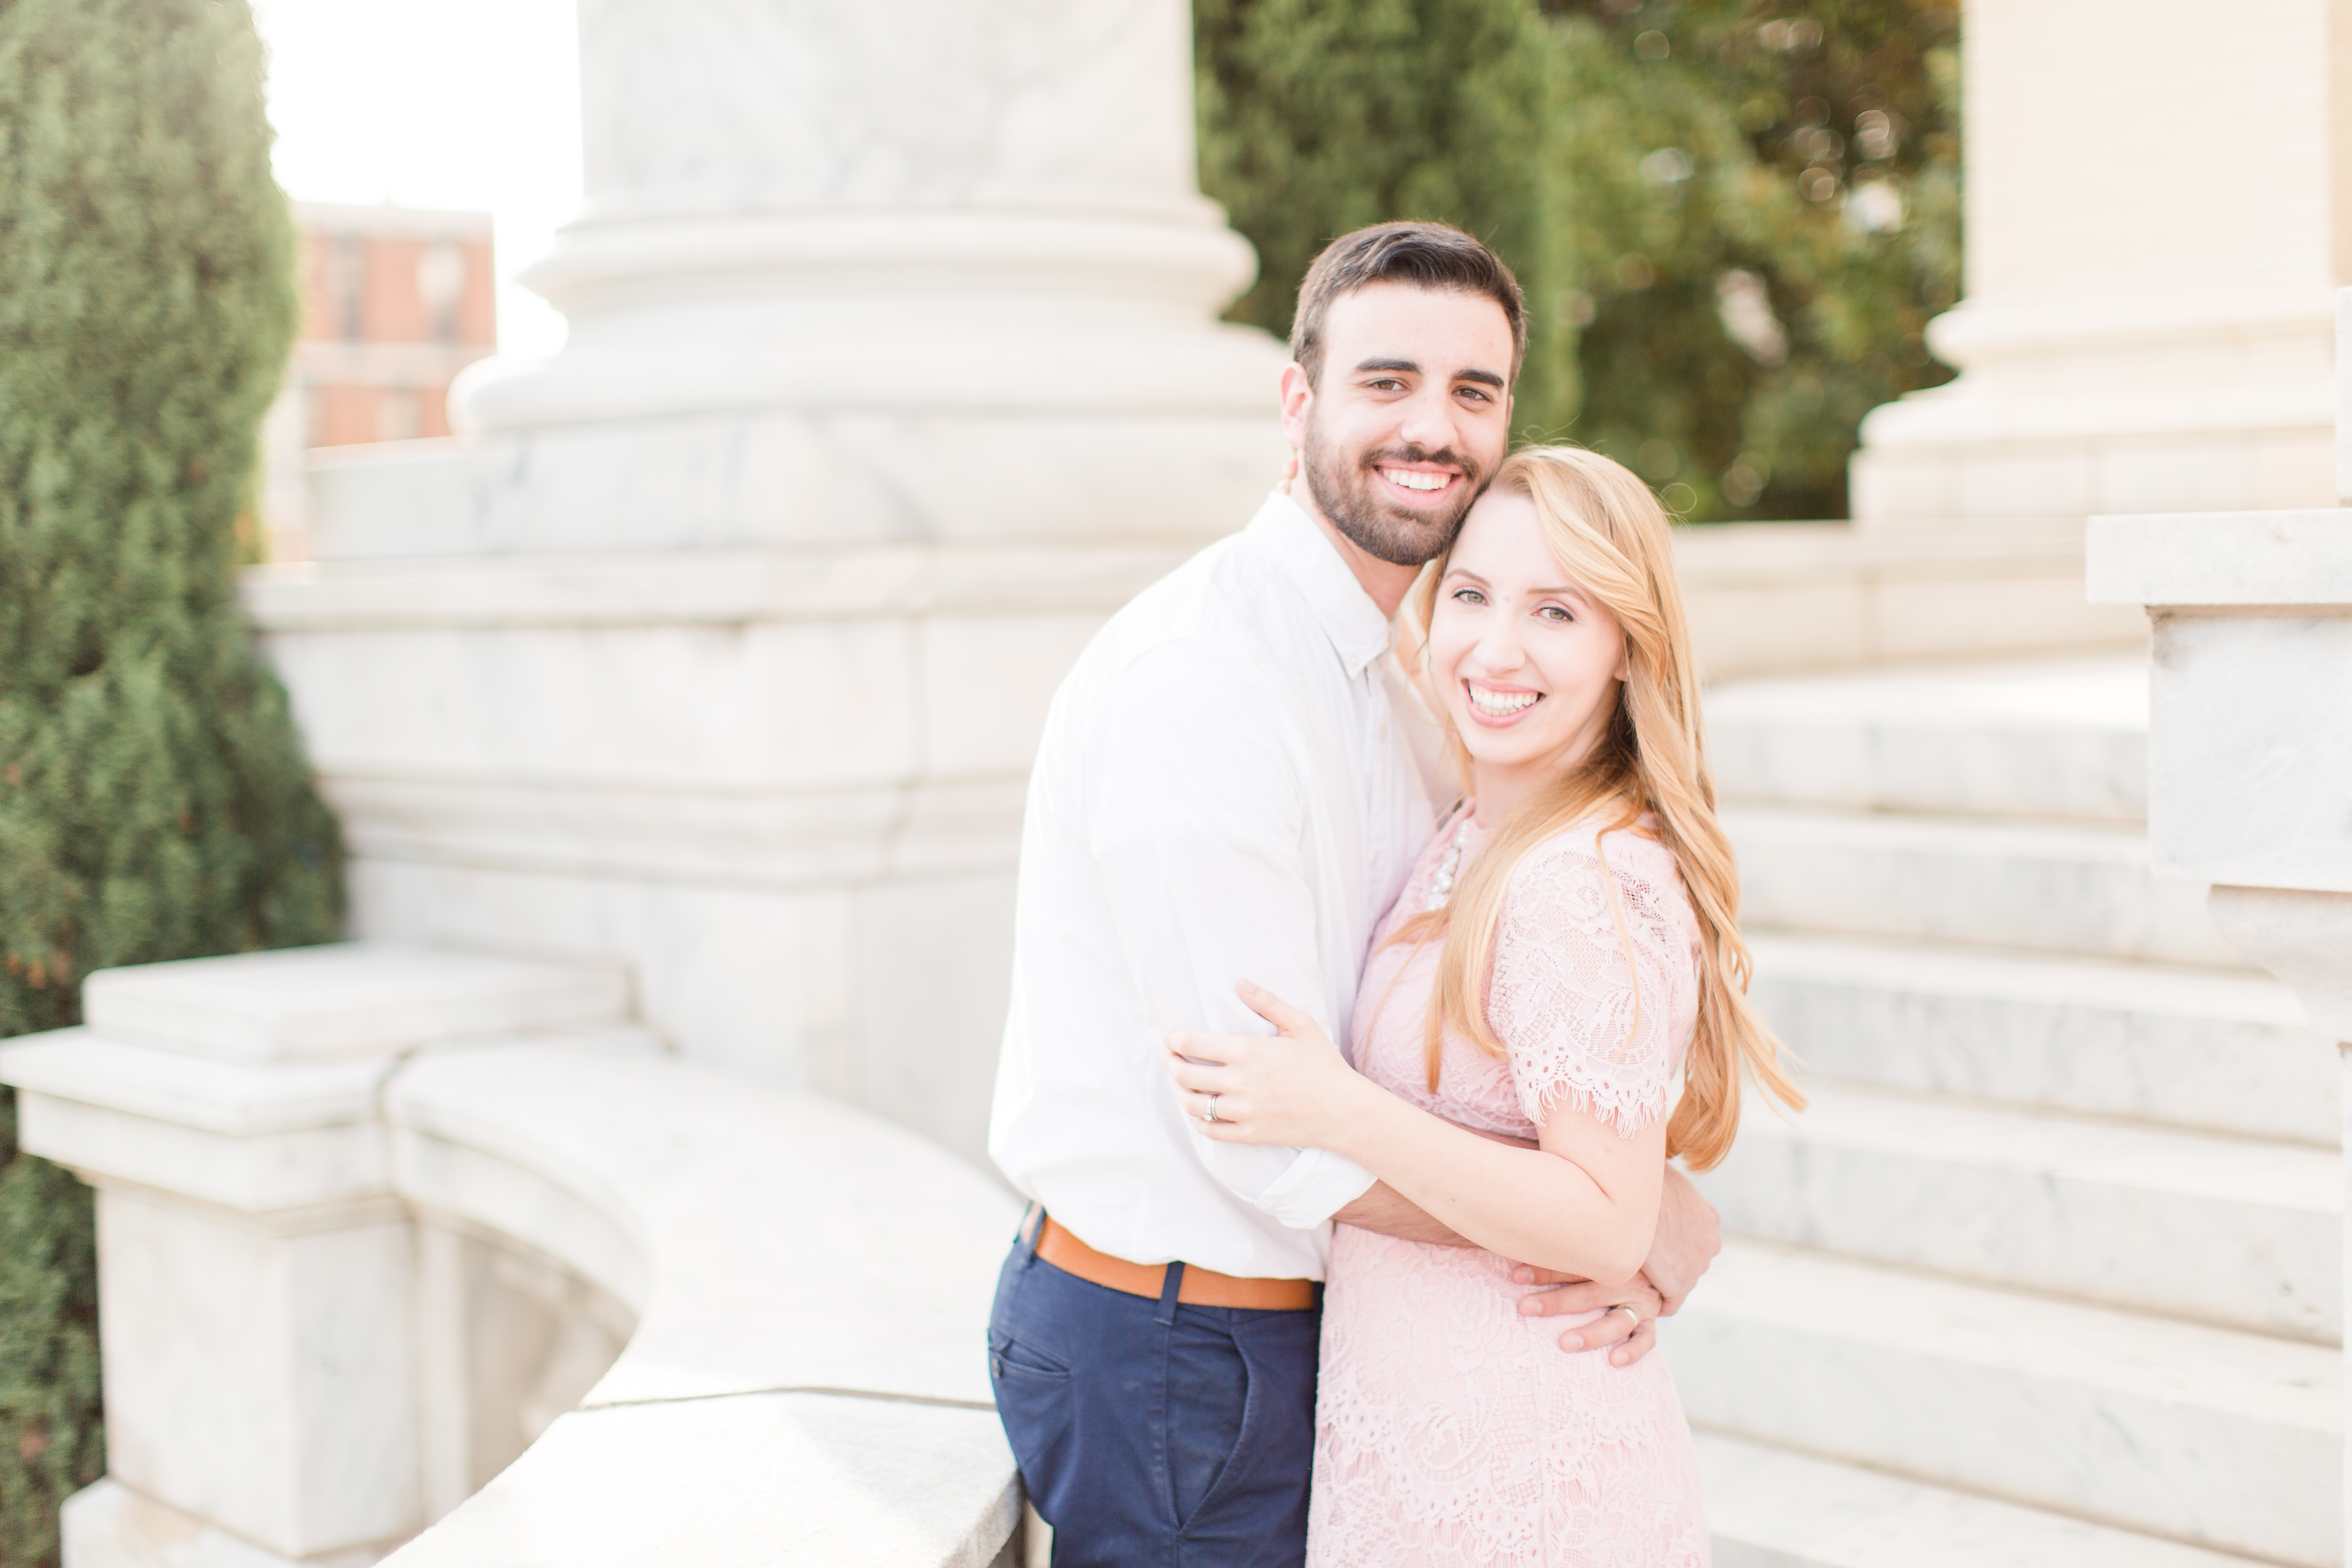 Wedding Photographers in Birmingham, Alabama Katie & Alec Photography | Our Business Journery Part 1 Highschool